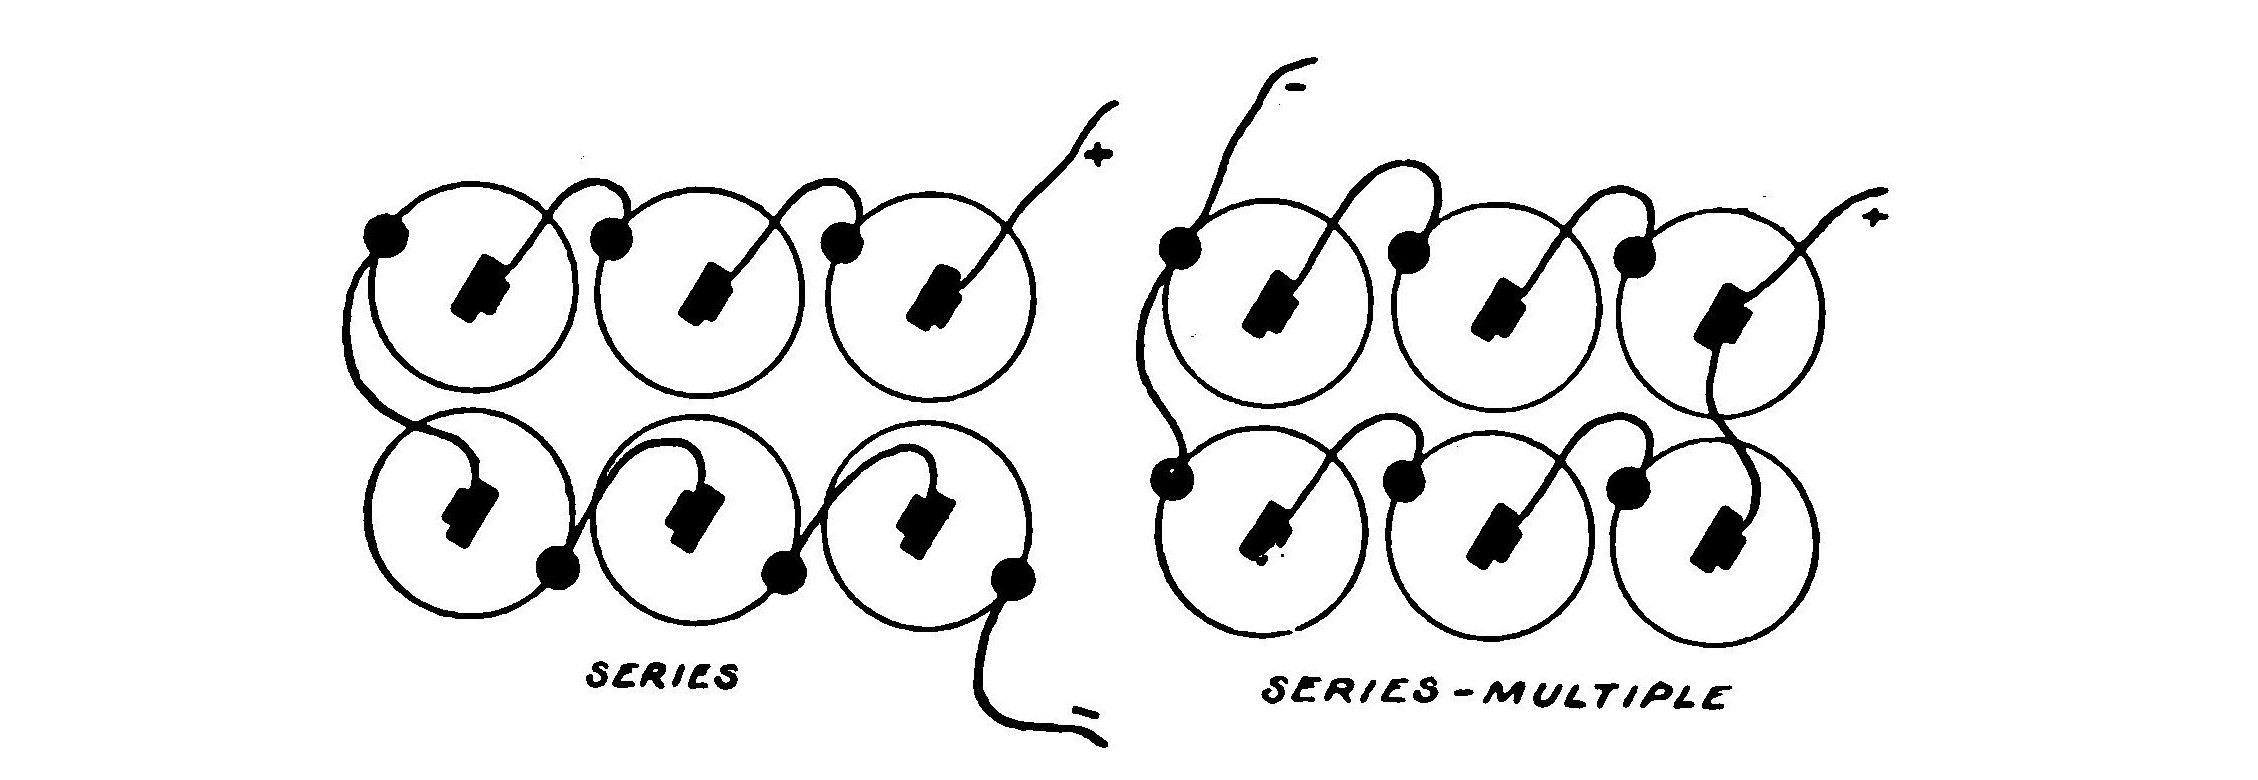 FIG. 28.—Diagram showing how batteries may be arranged in "series" or "series multiple."